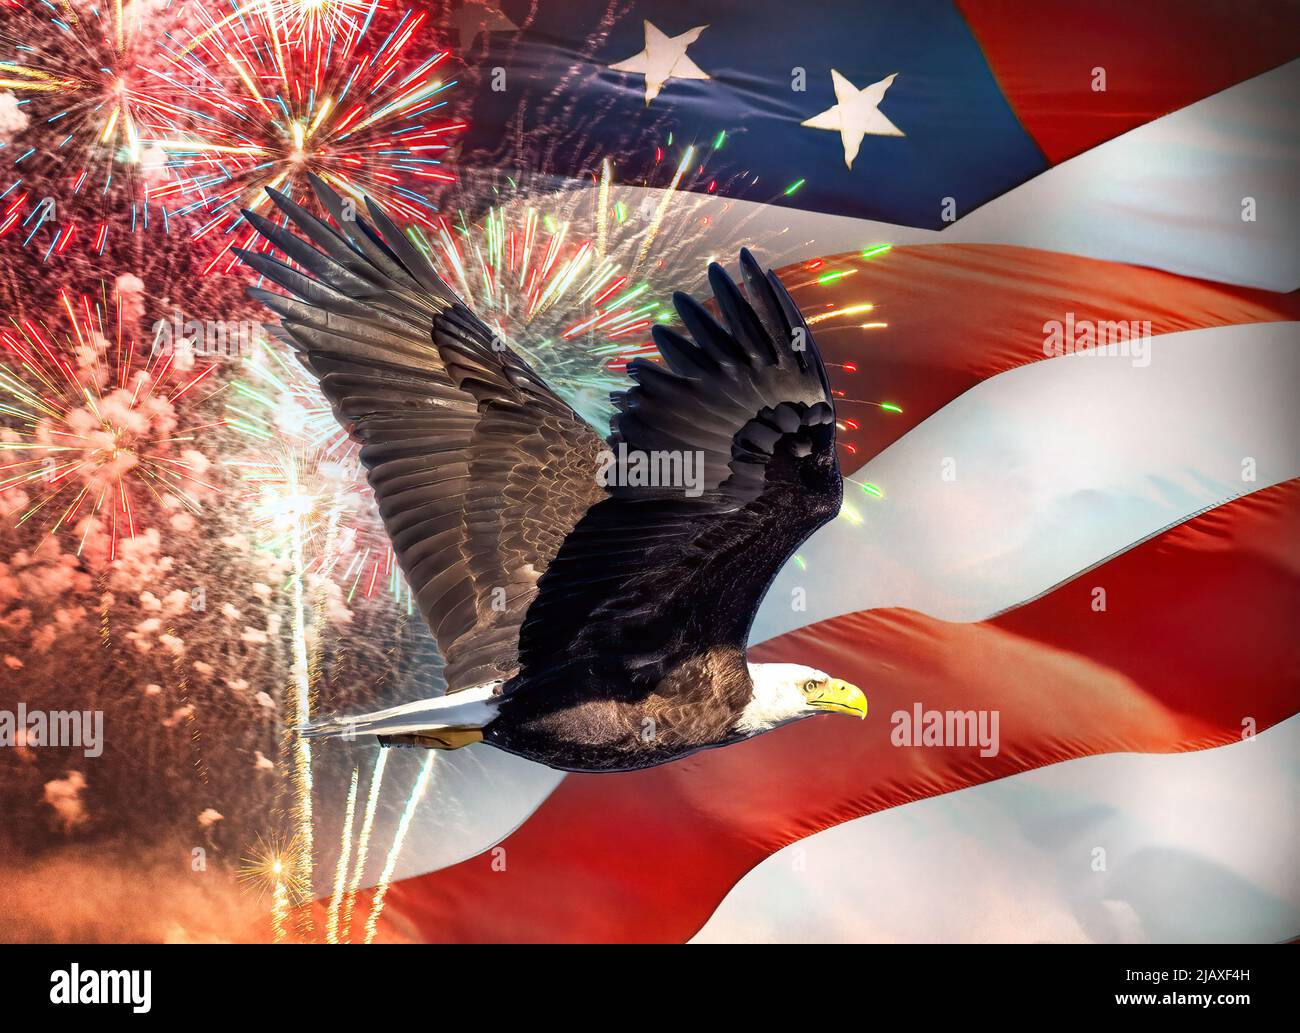 Bald Eagle flying against a background of the American flag and fireworks Stock Photo